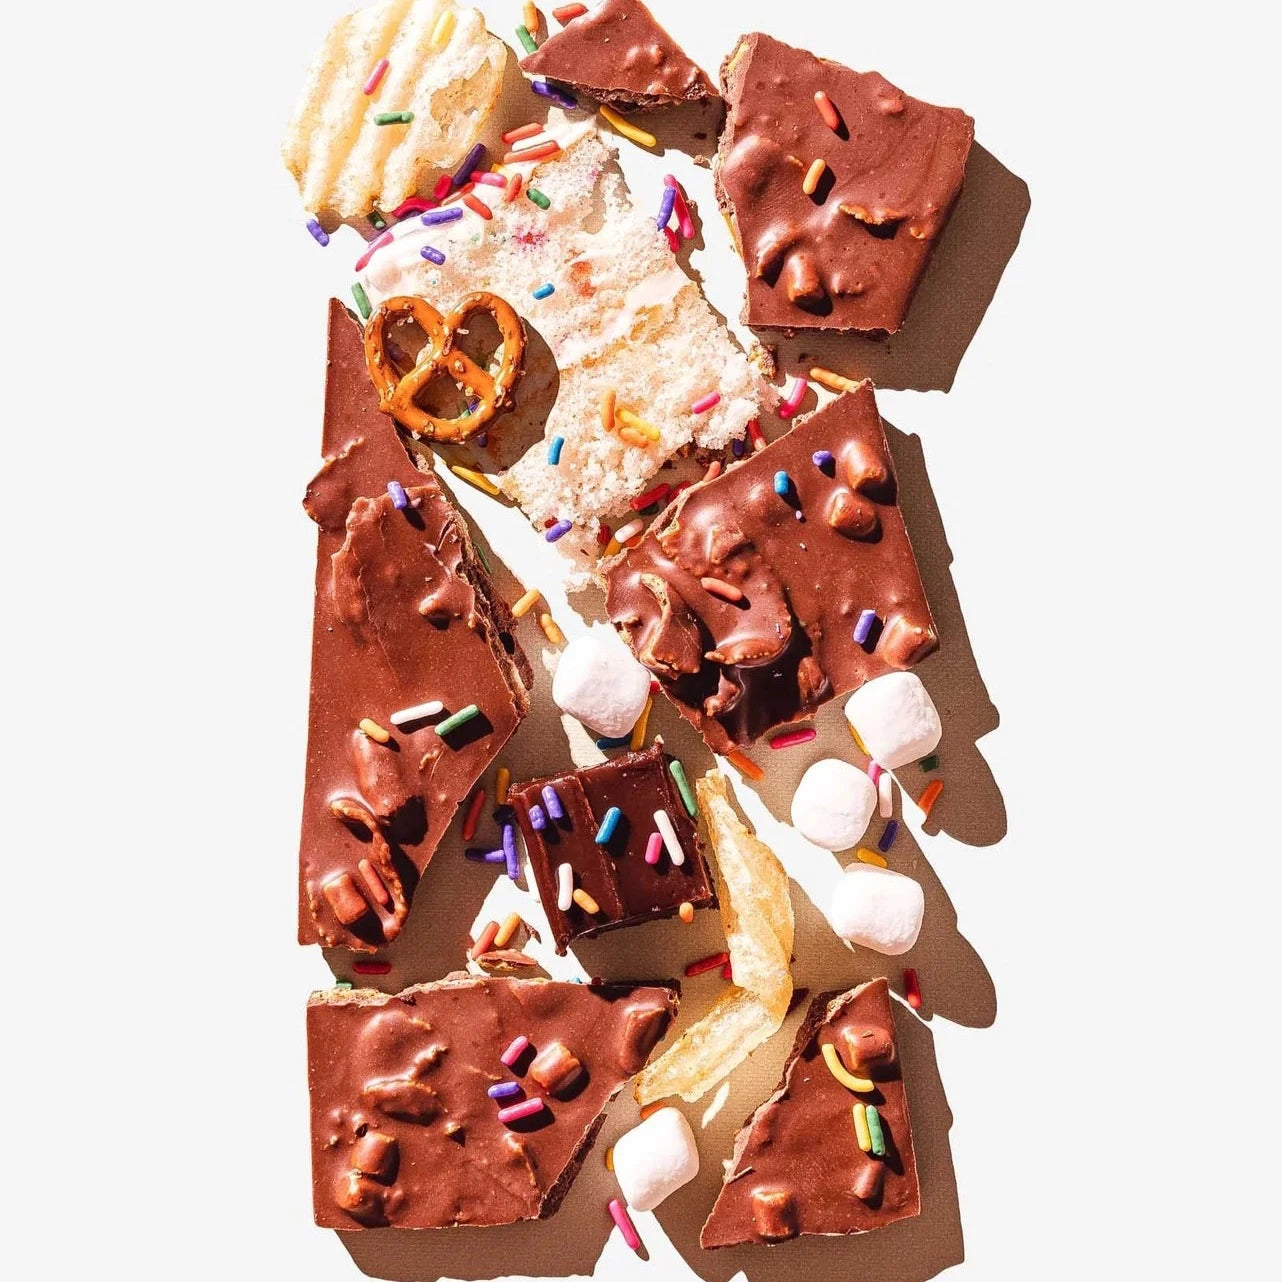 broke up chocolate bar with cake sprinkles marshmallow and chips throughout 